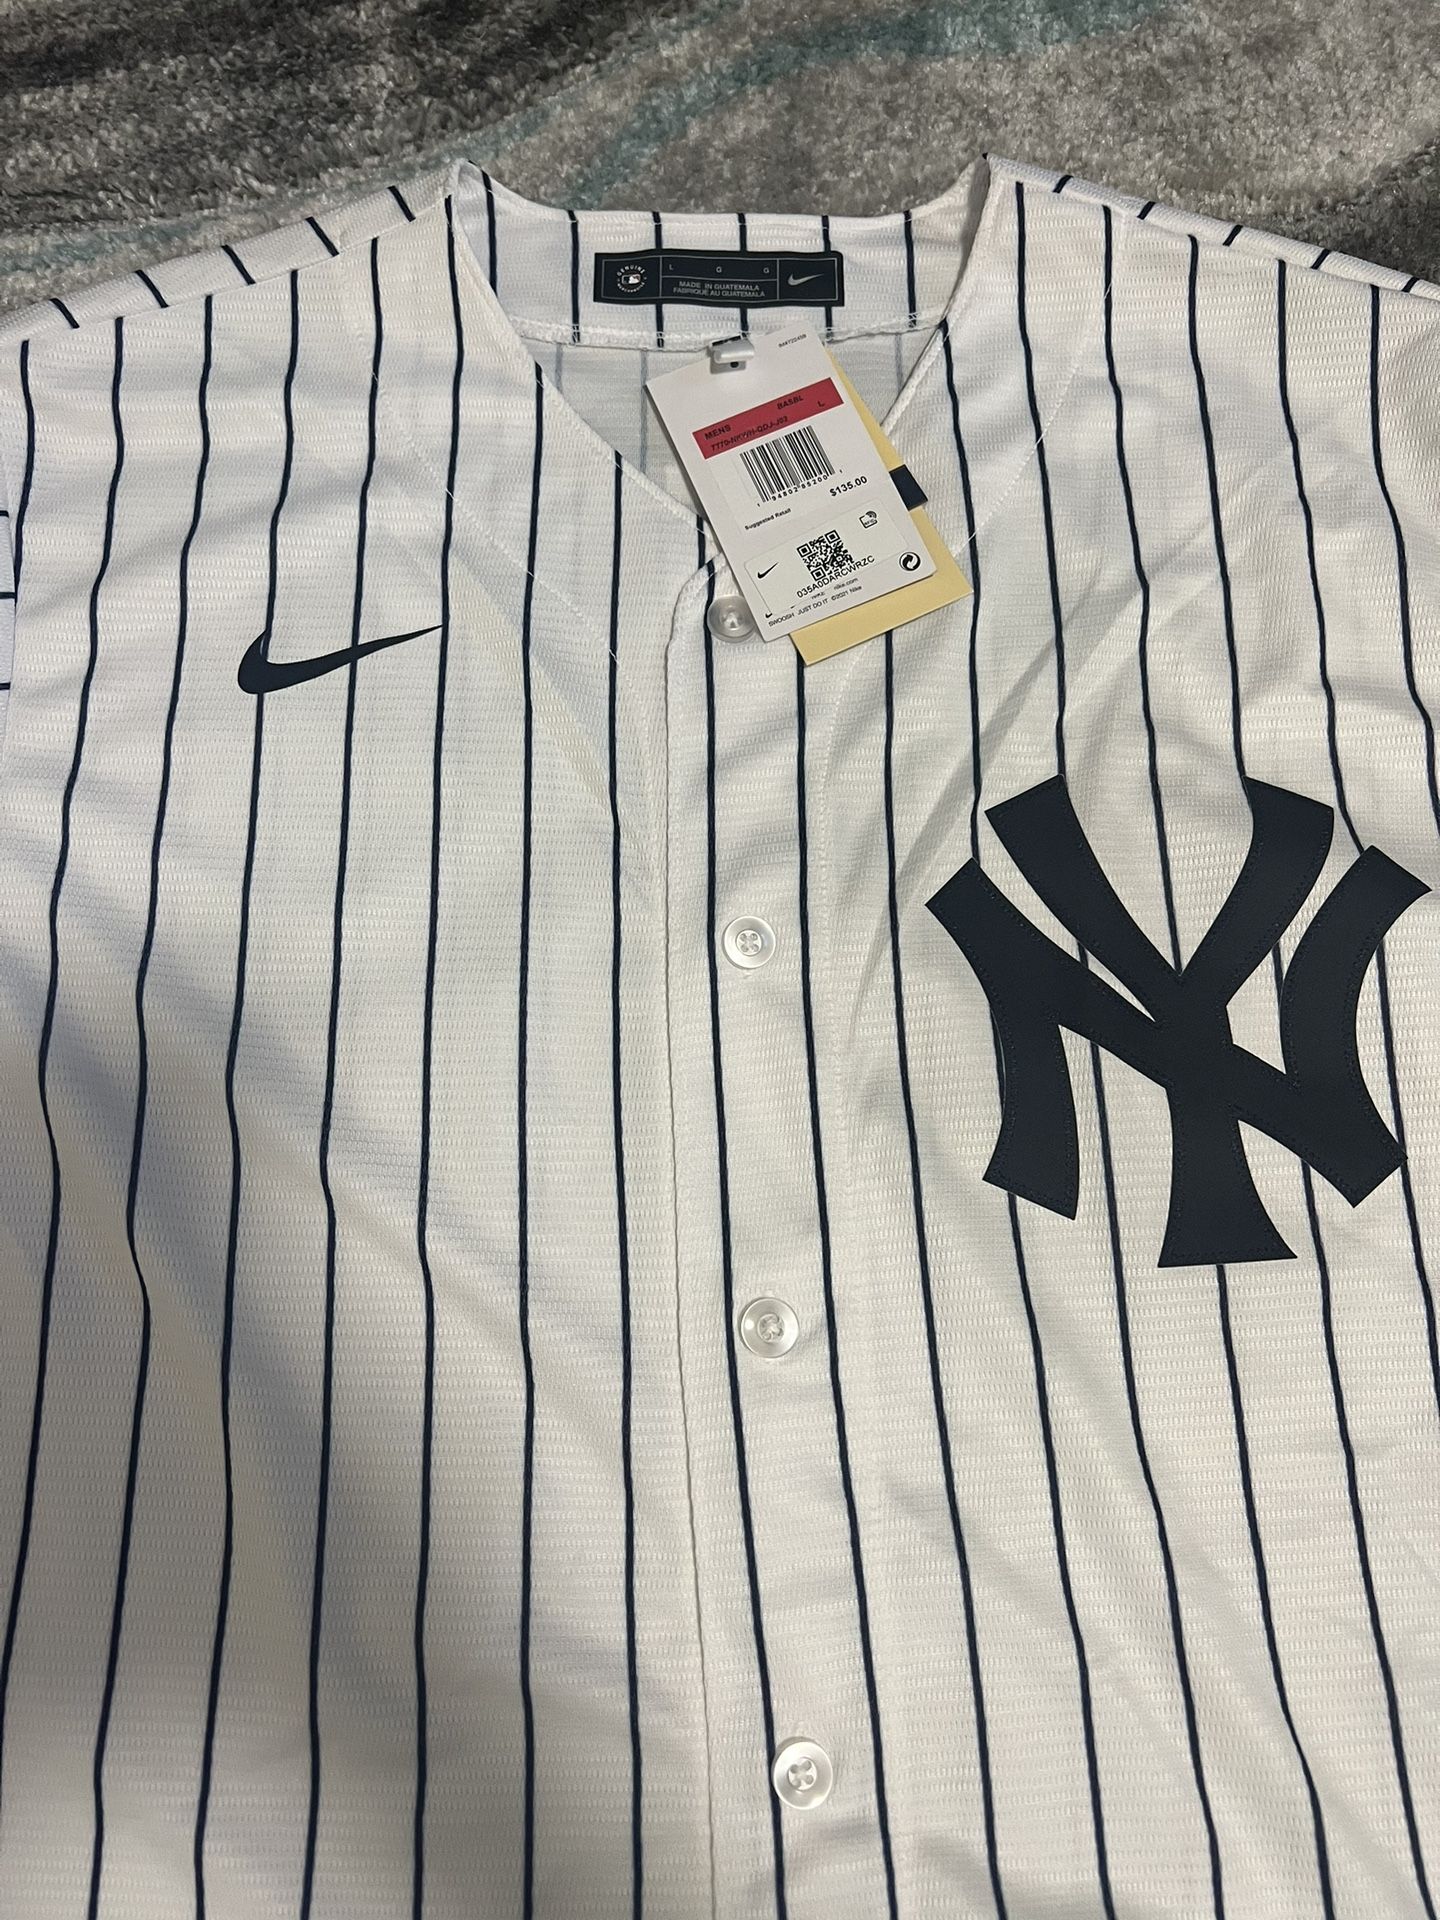 Kids Youth Nike New York Yankees Judge Baseball Jersey NEW Size Large for  Sale in West Islip, NY - OfferUp